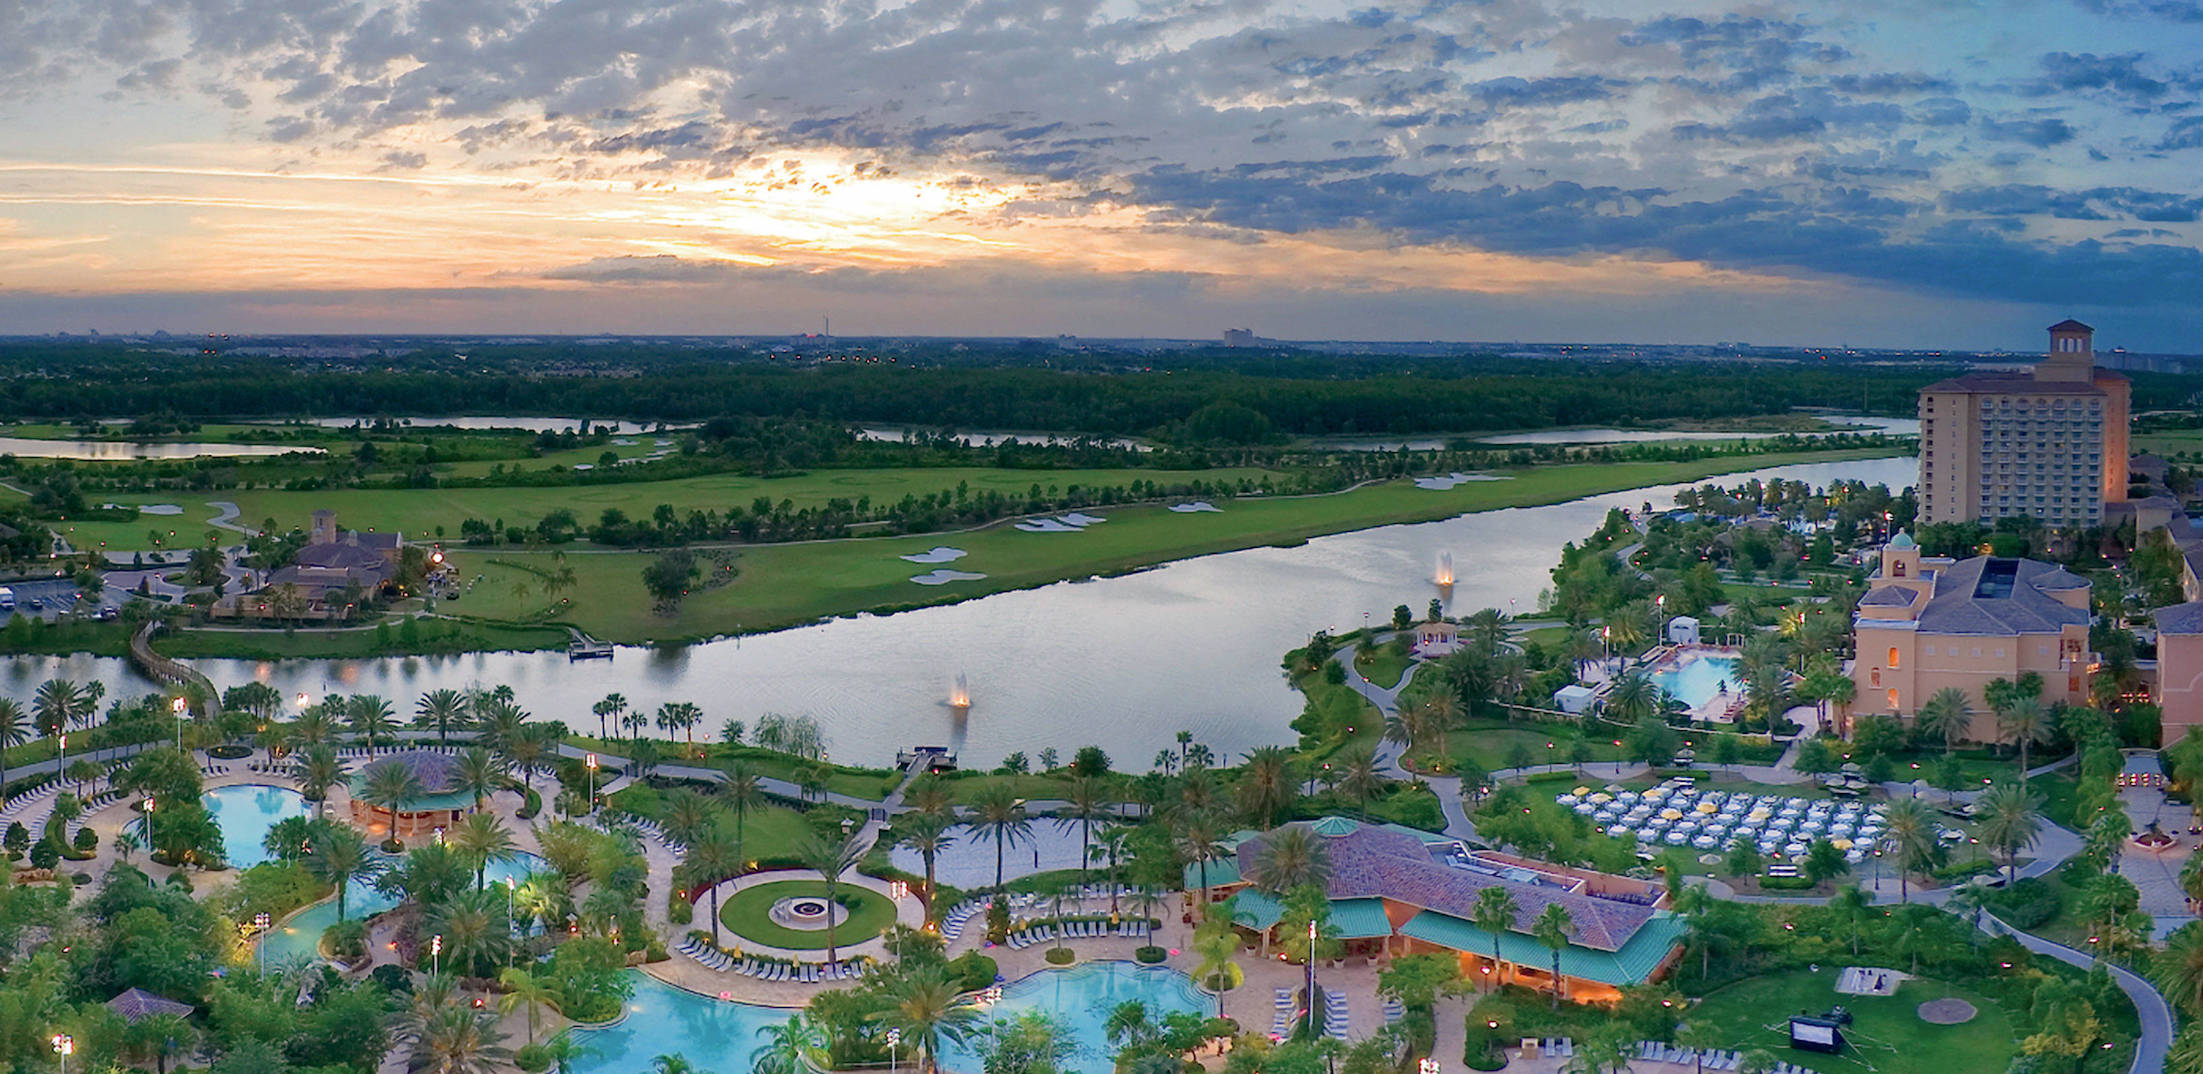 View from the JW Marriott of the Grande Lakes, Orlando area showing pools, lakes, greenspace, and other properties